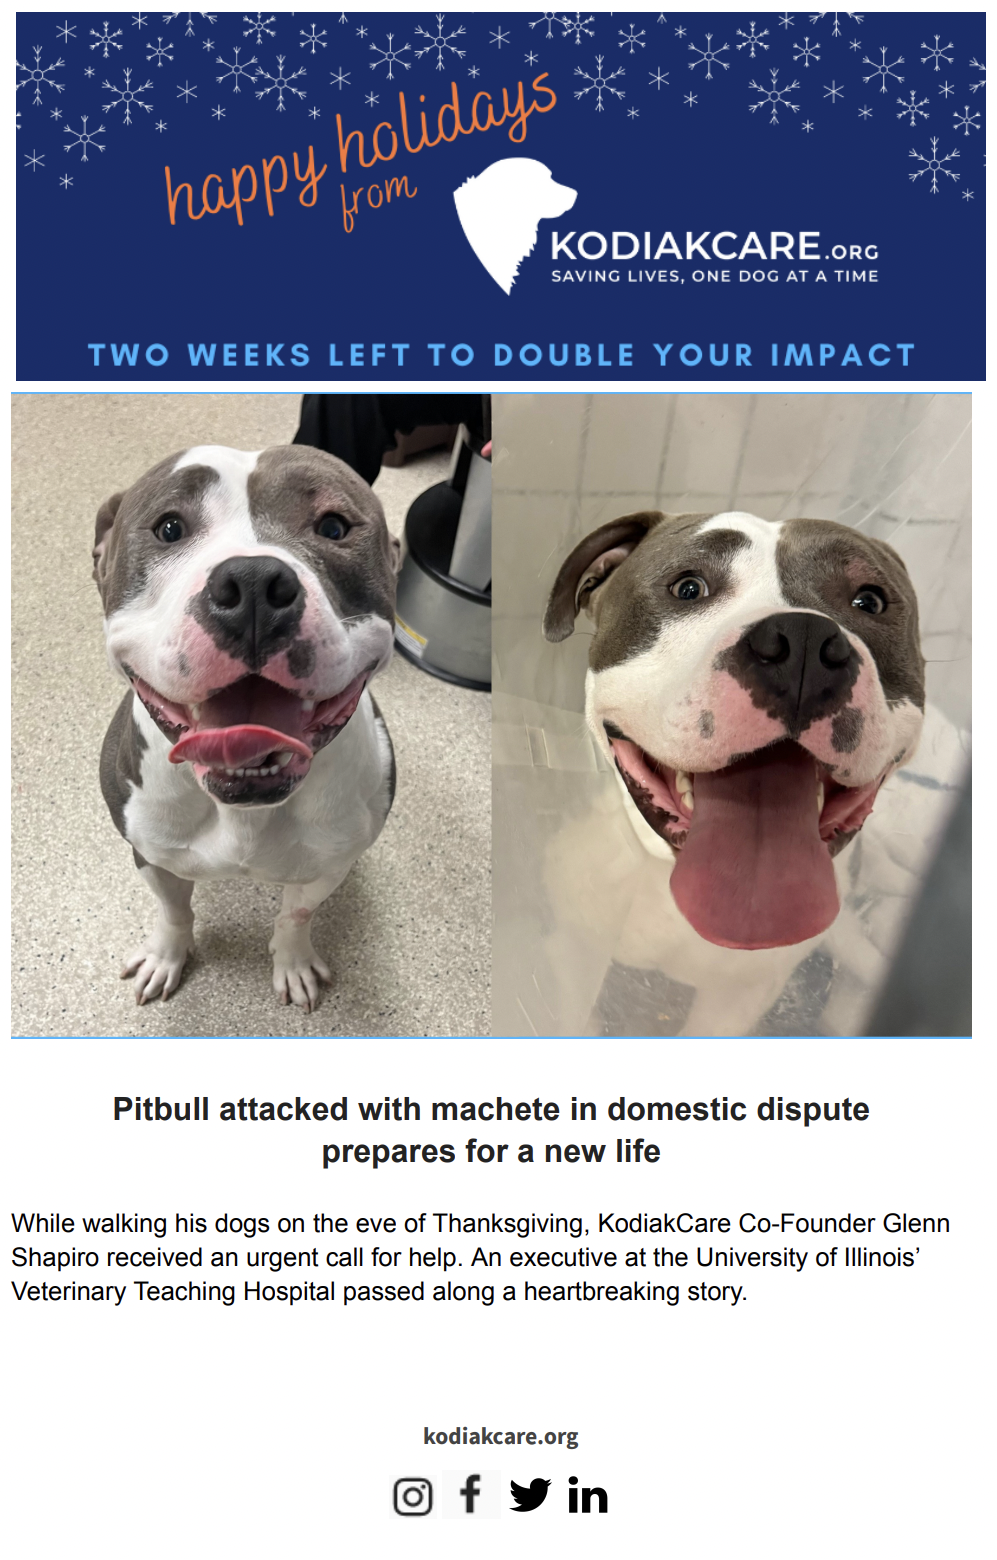 Pitbull attacked with machete in domestic dispute prepares for a new life